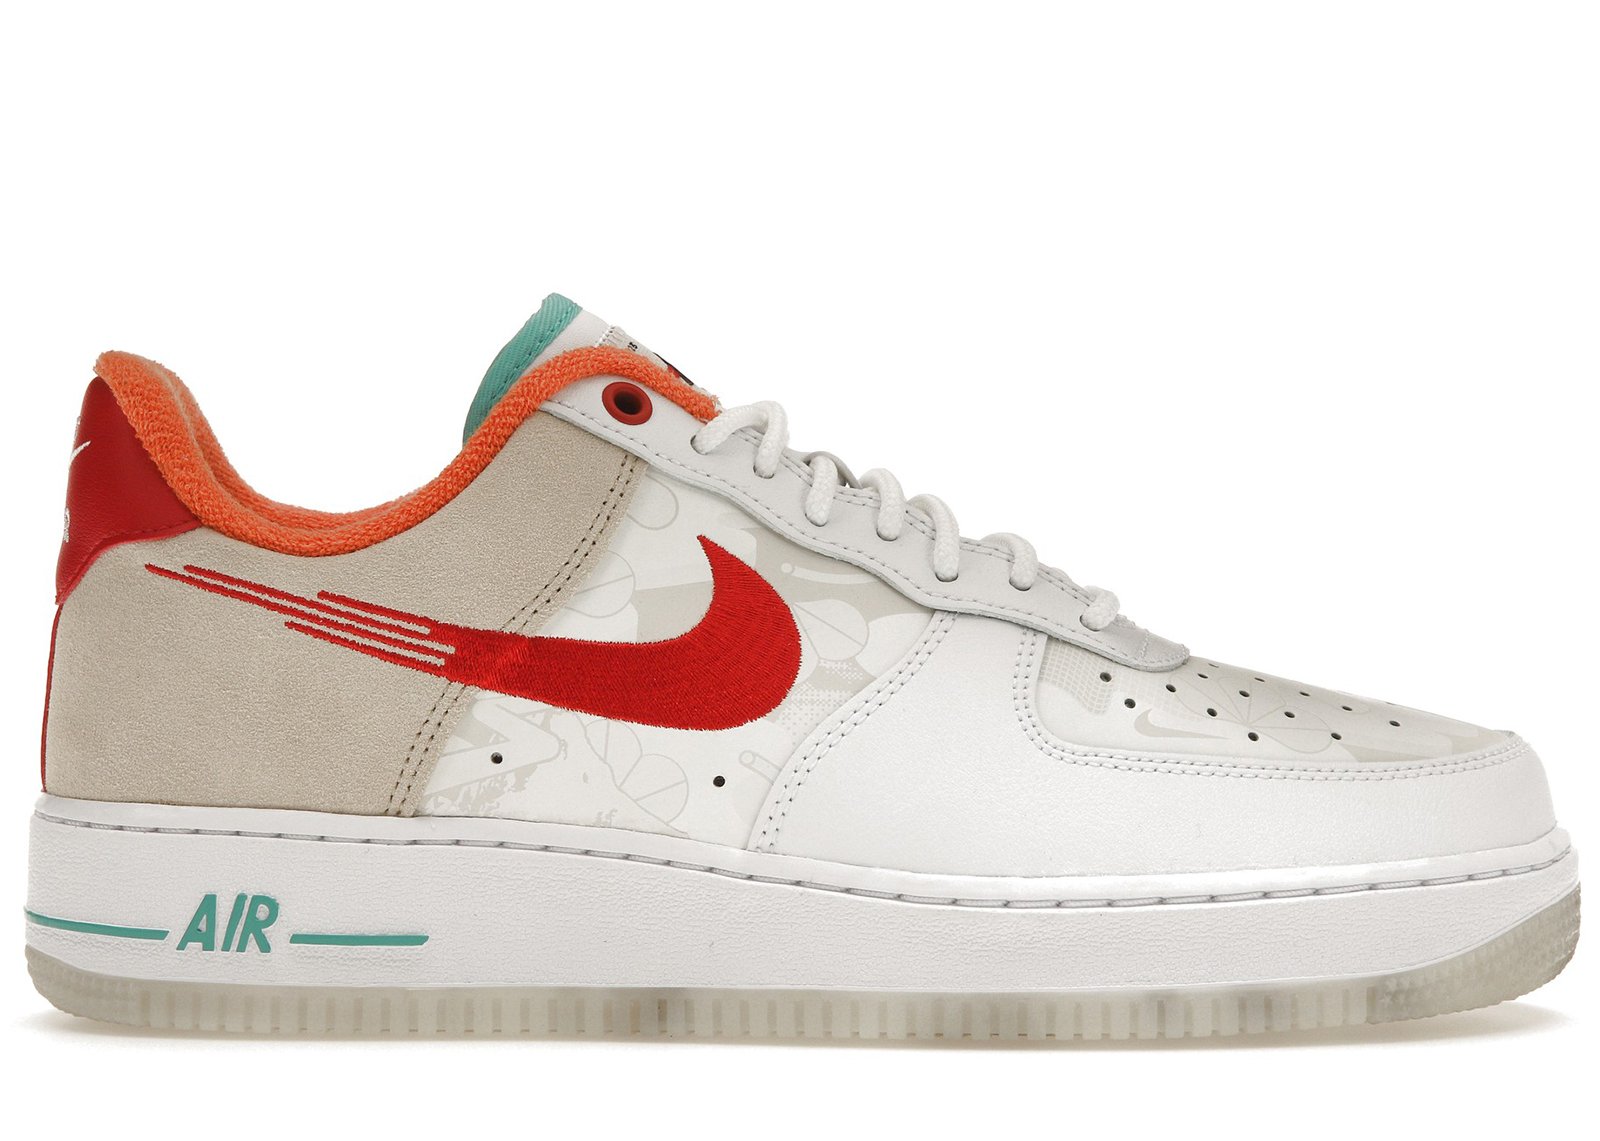 Air Force 1 Low '07 PRM "Just Do It White Red Teal"